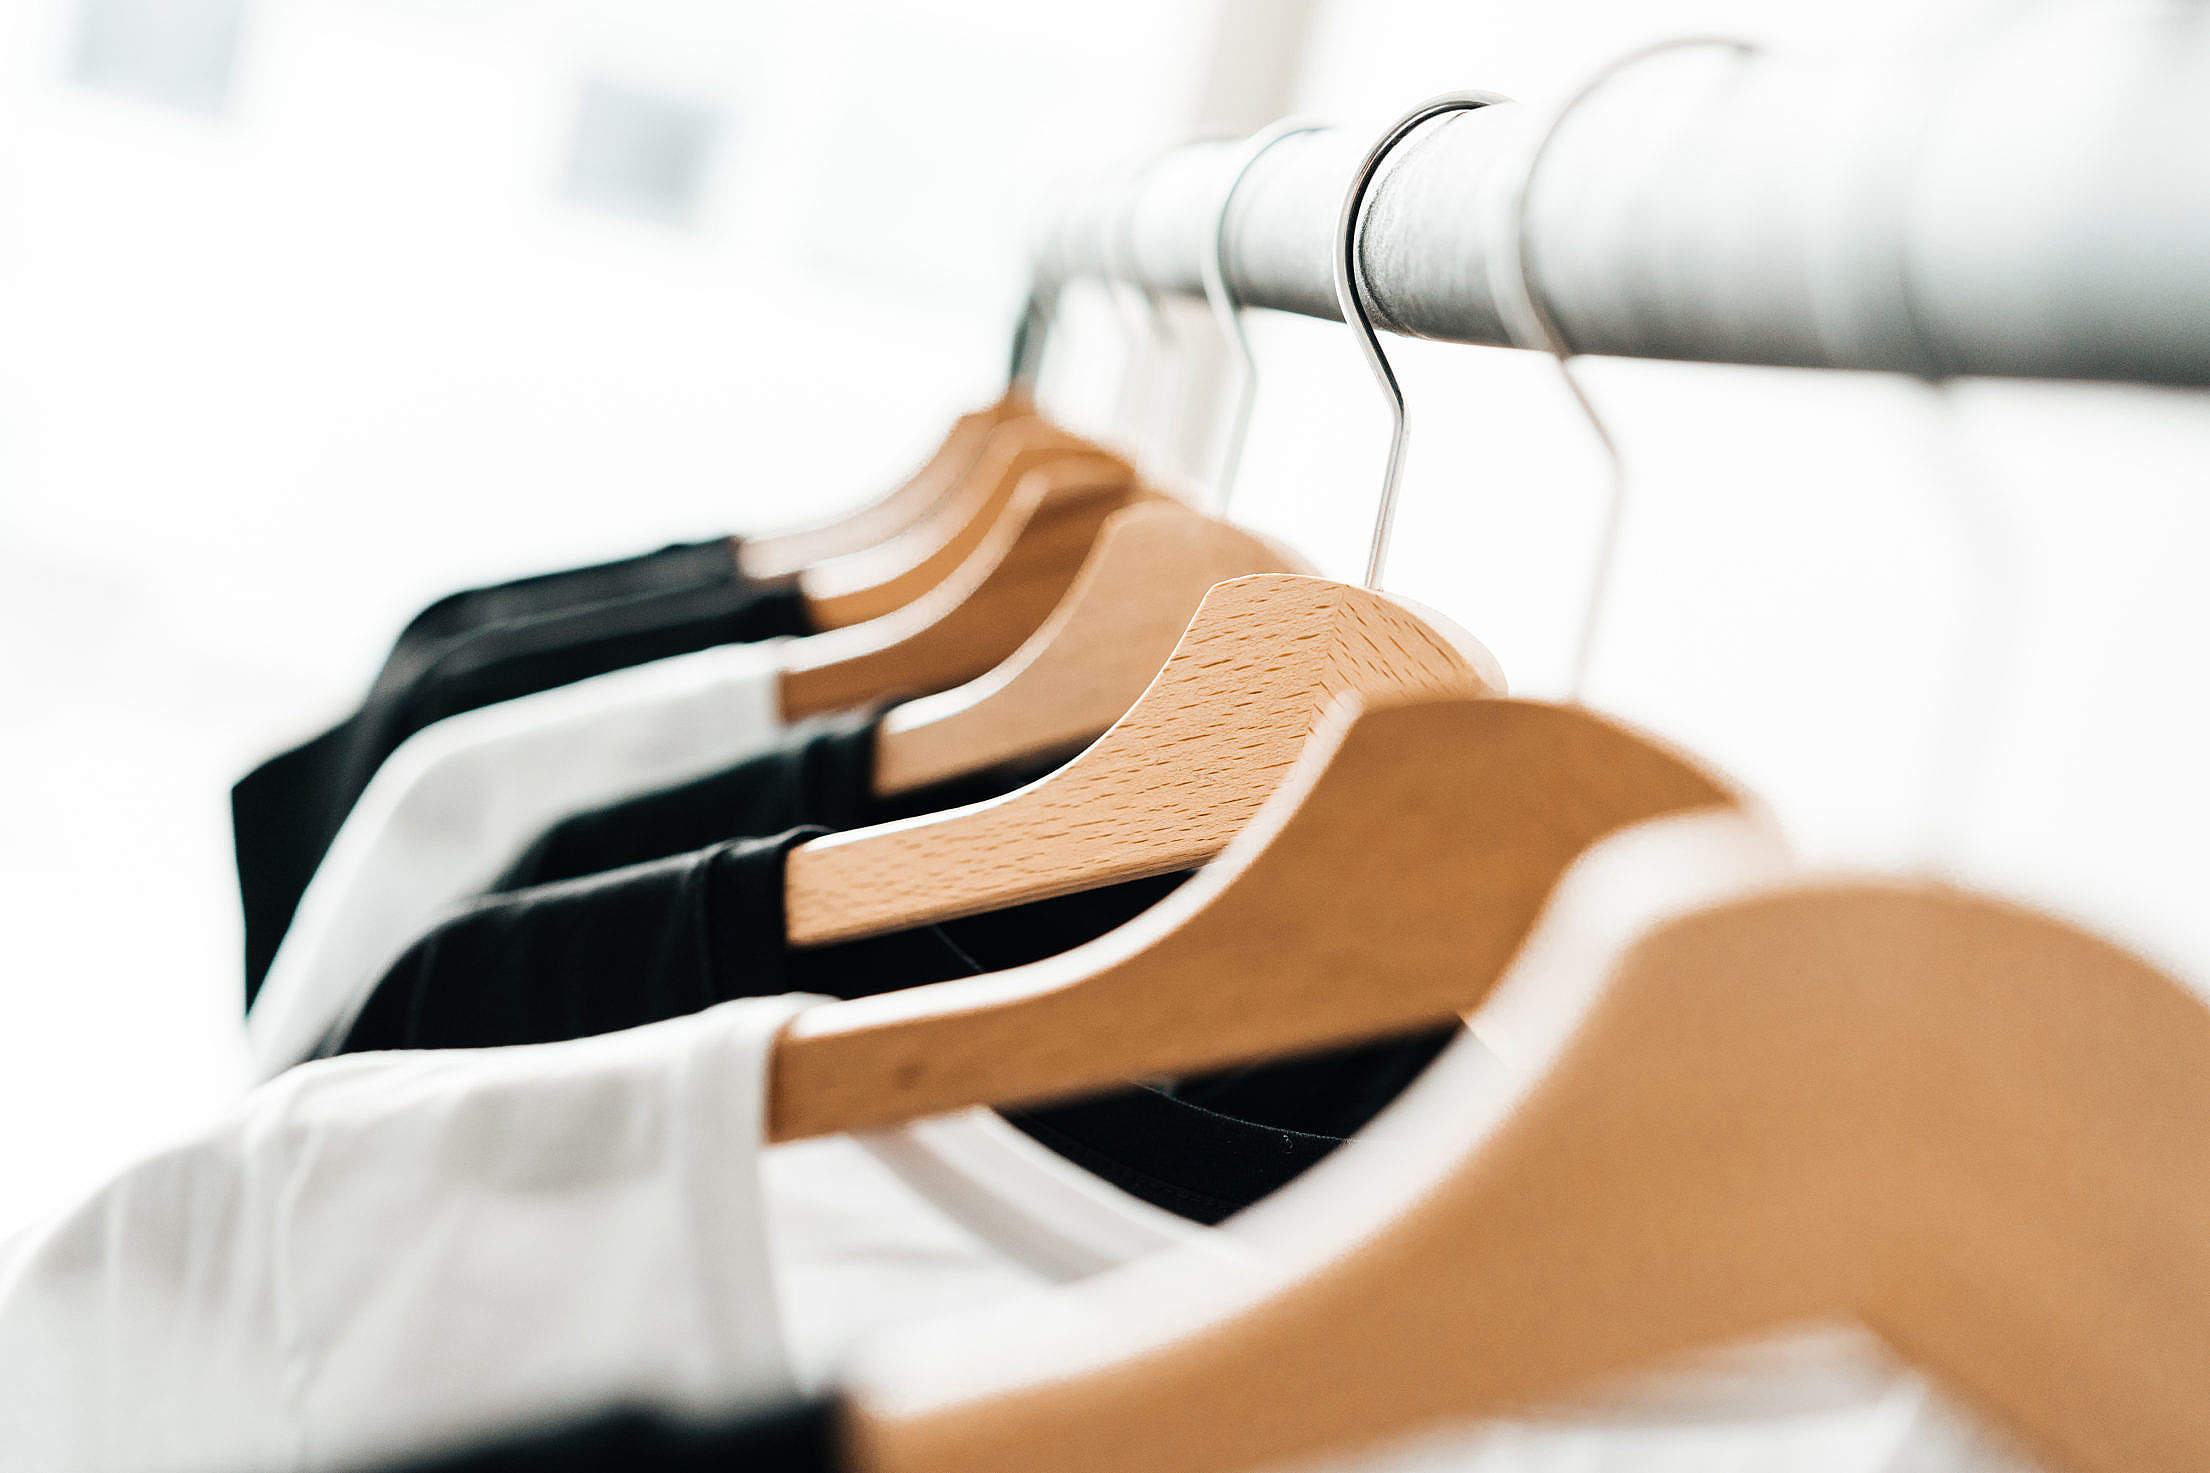 Wooden T-Shirt Hangers in Fashion Apparel Store #2 Free Stock Photo